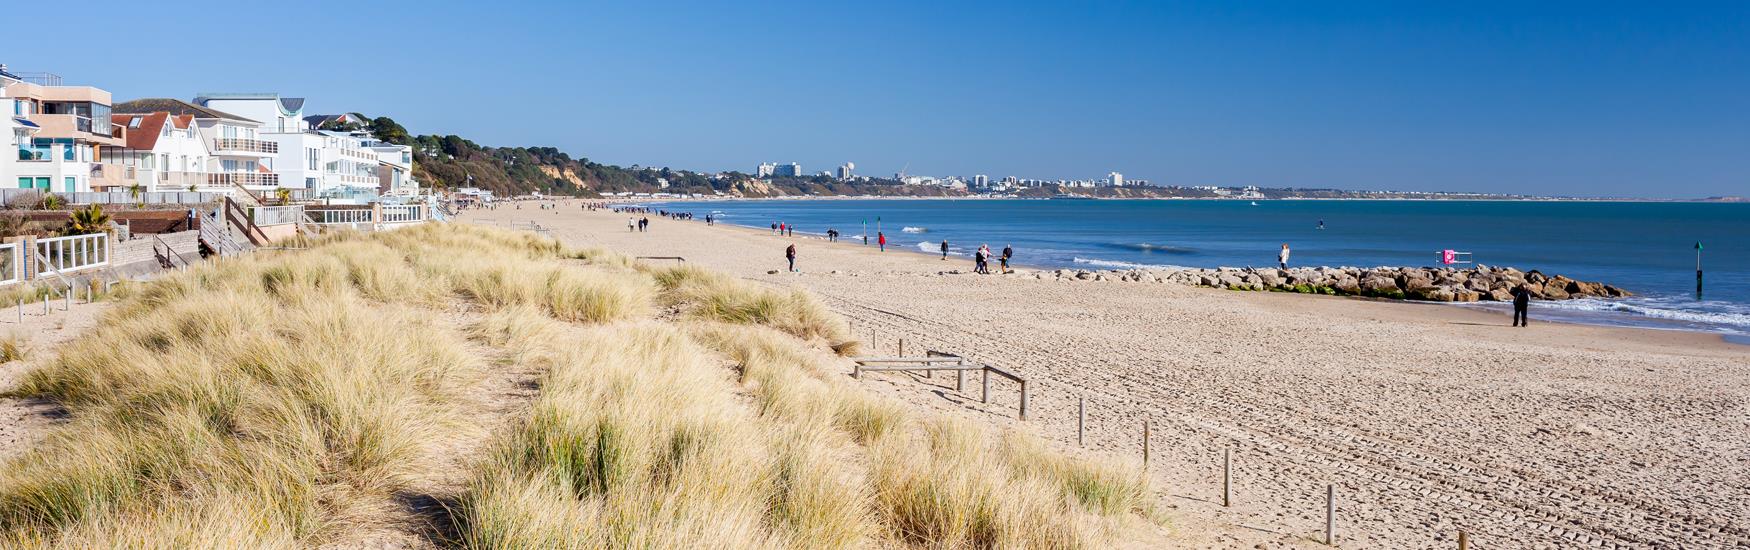 Landscape view of Sandbanks Beach with buildings on the left hand side and sandy beach on right with sea in background